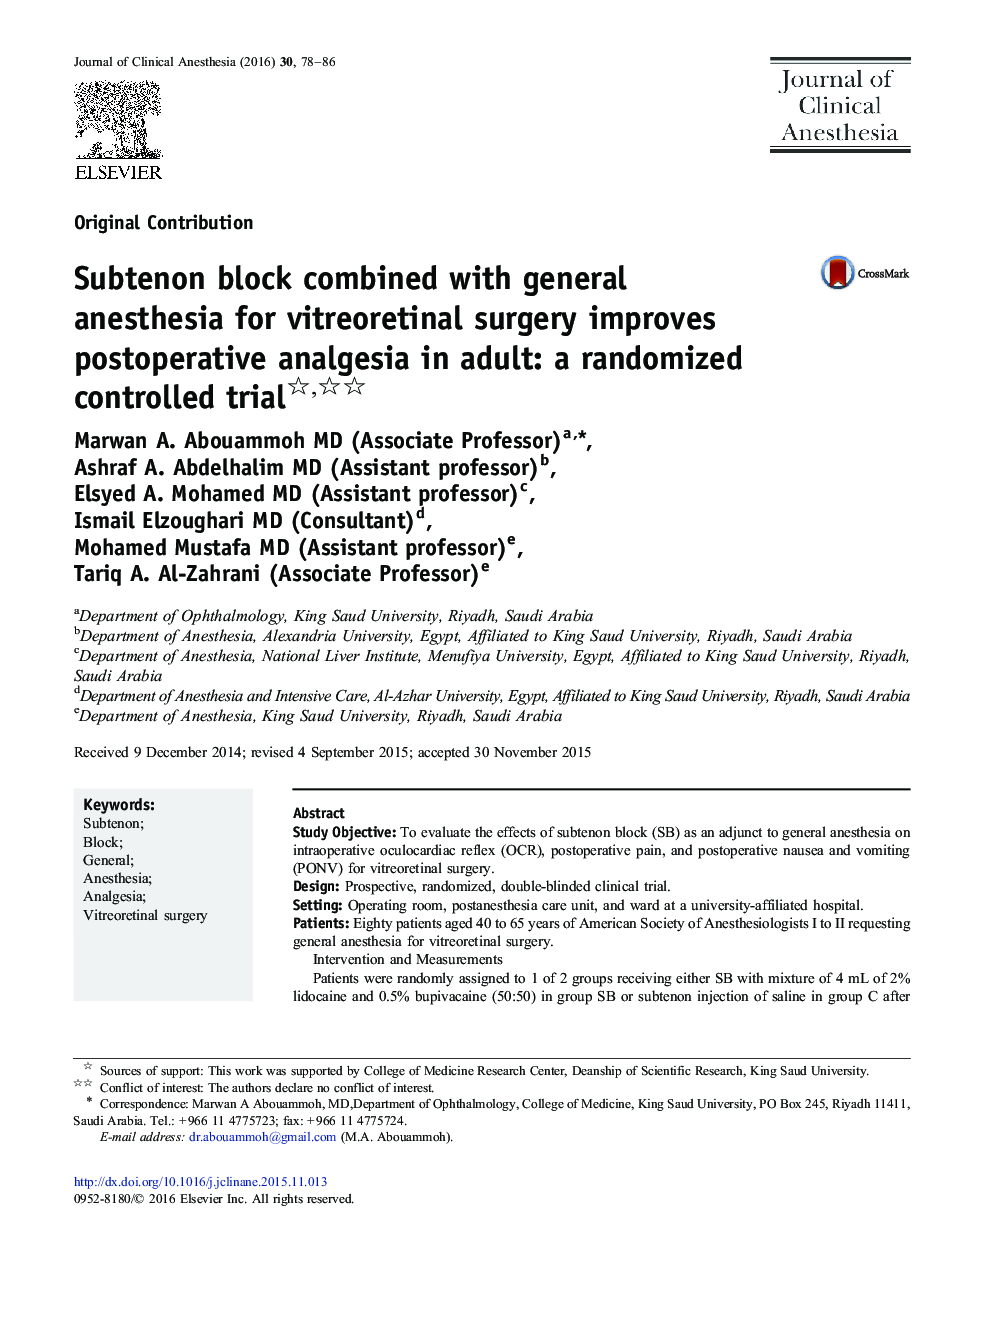 Original ContributionSubtenon block combined with general anesthesia for vitreoretinal surgery improves postoperative analgesia in adult: a randomized controlled trial